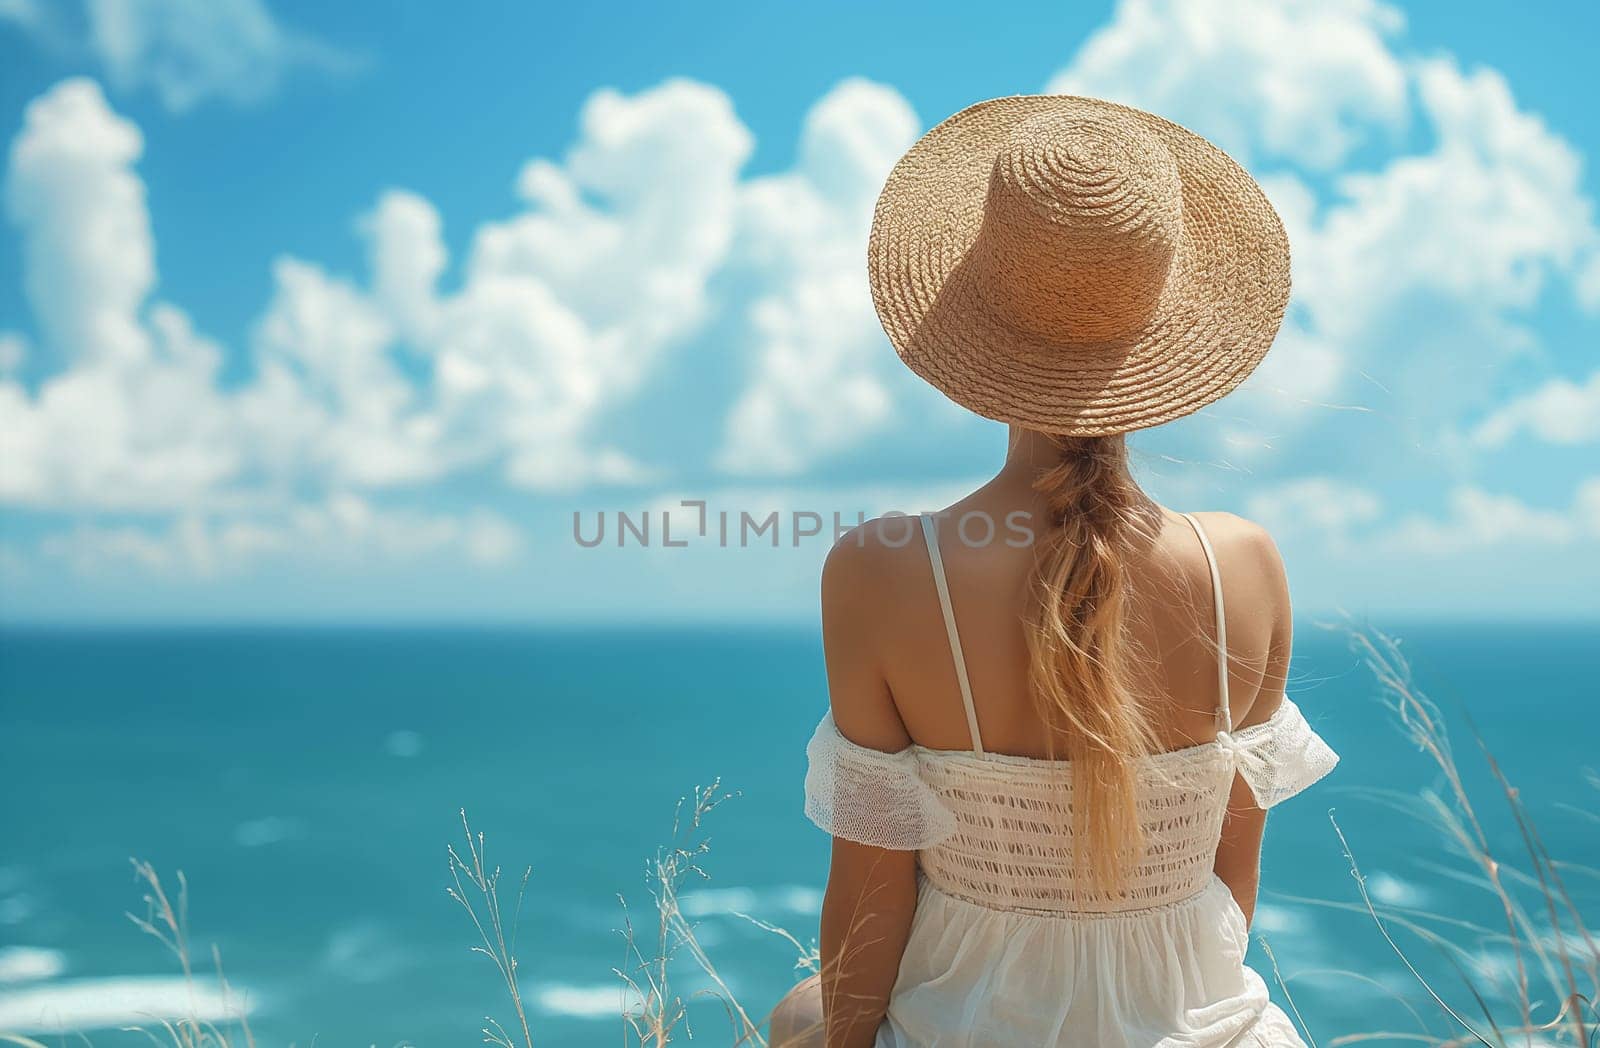 Woman enjoying a serene beach view while wearing a sun hat and white dress by Hype2art